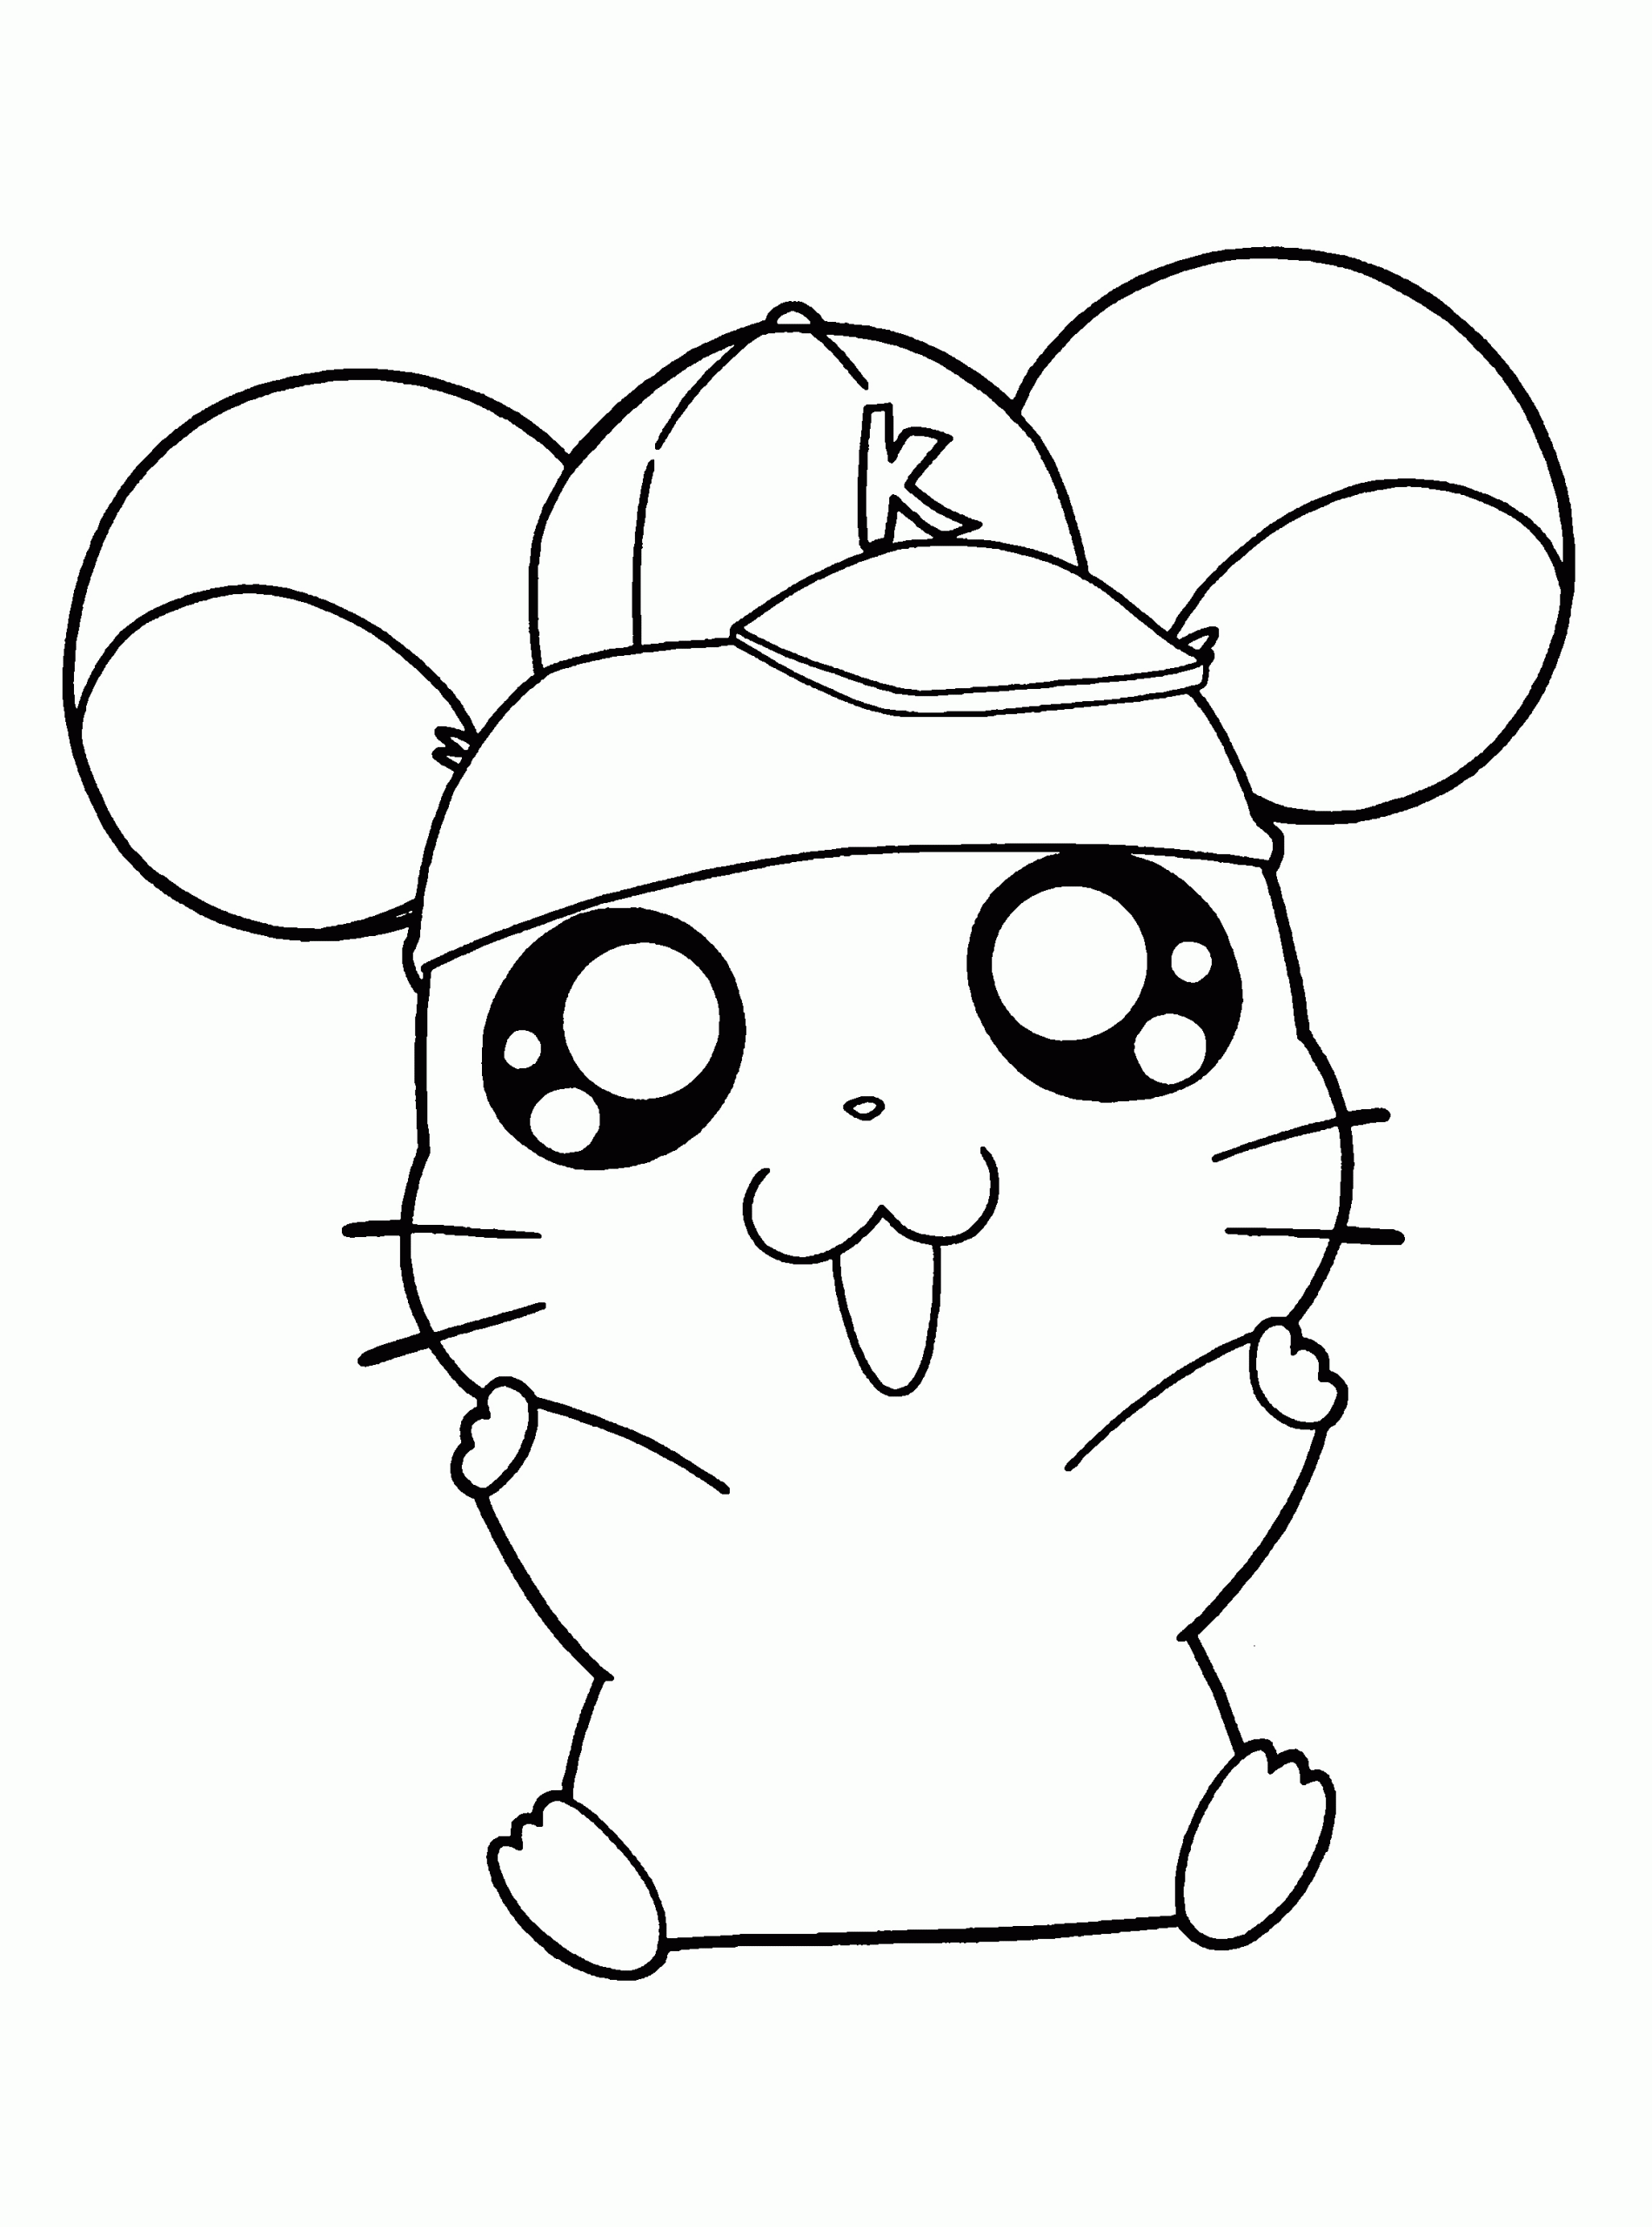 Cute Baby Pig Coloring Pages
 Cute Guinea Pig Drawing at GetDrawings